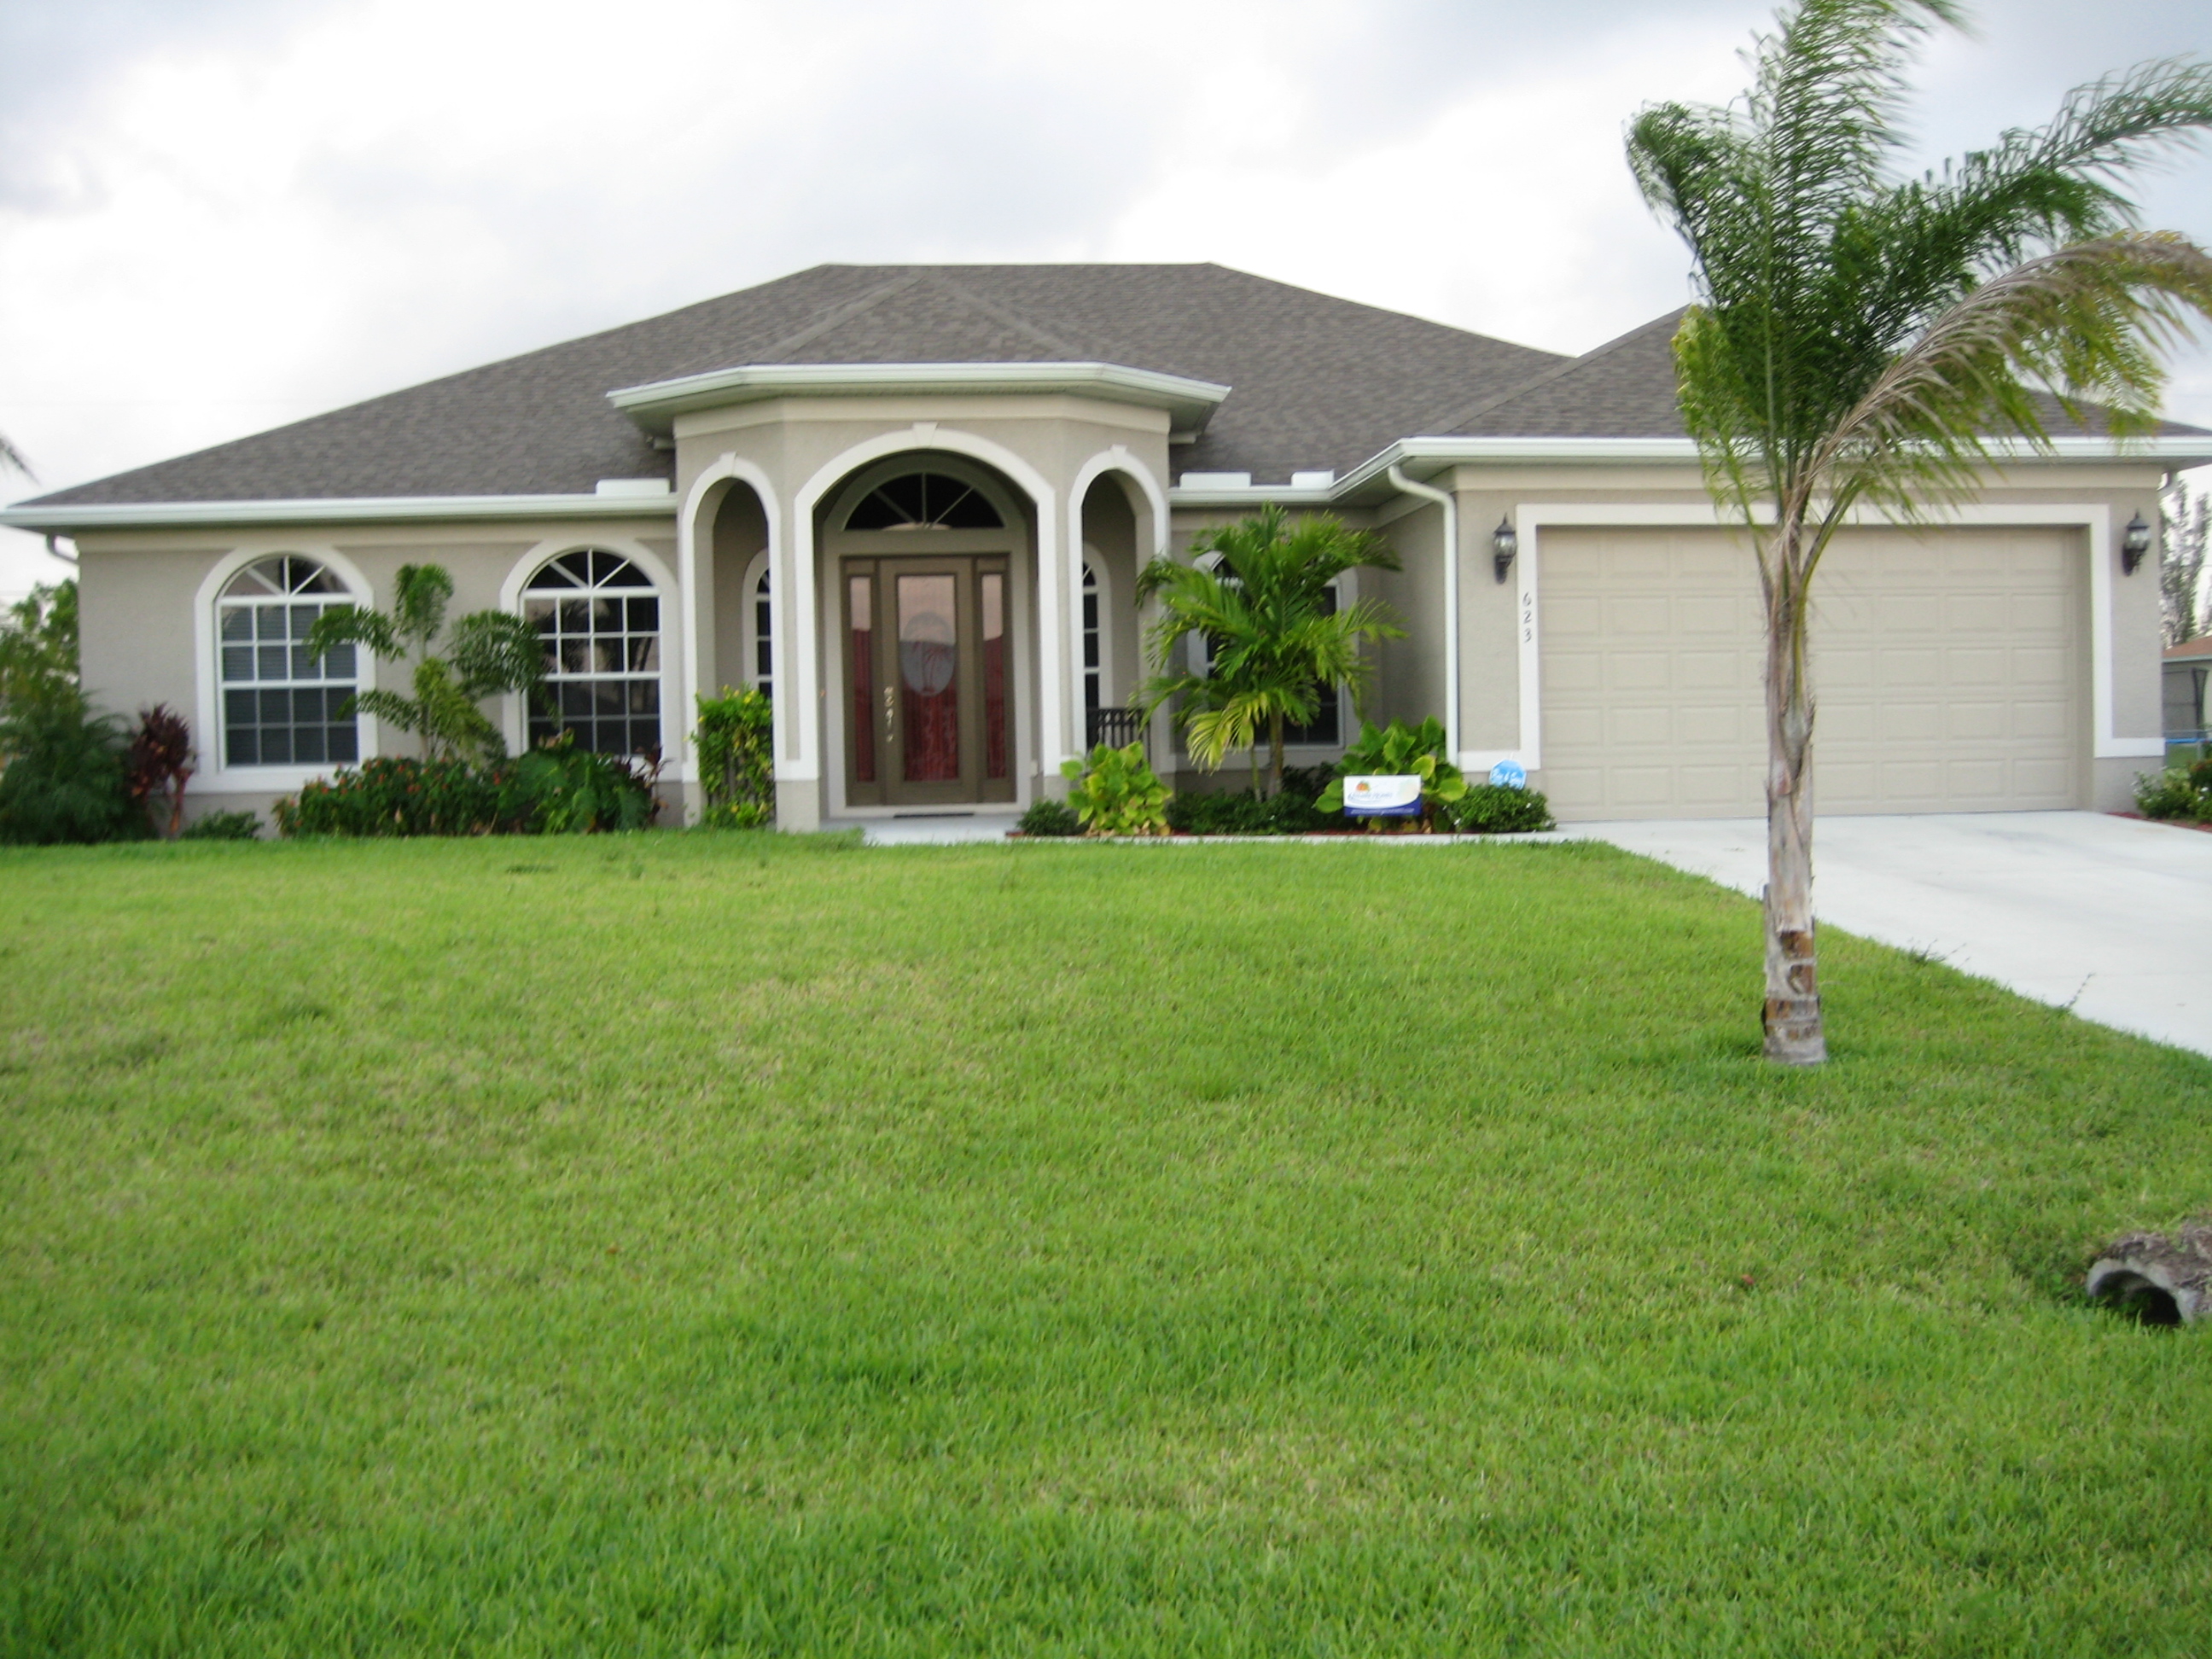 Home inspections Naples FL